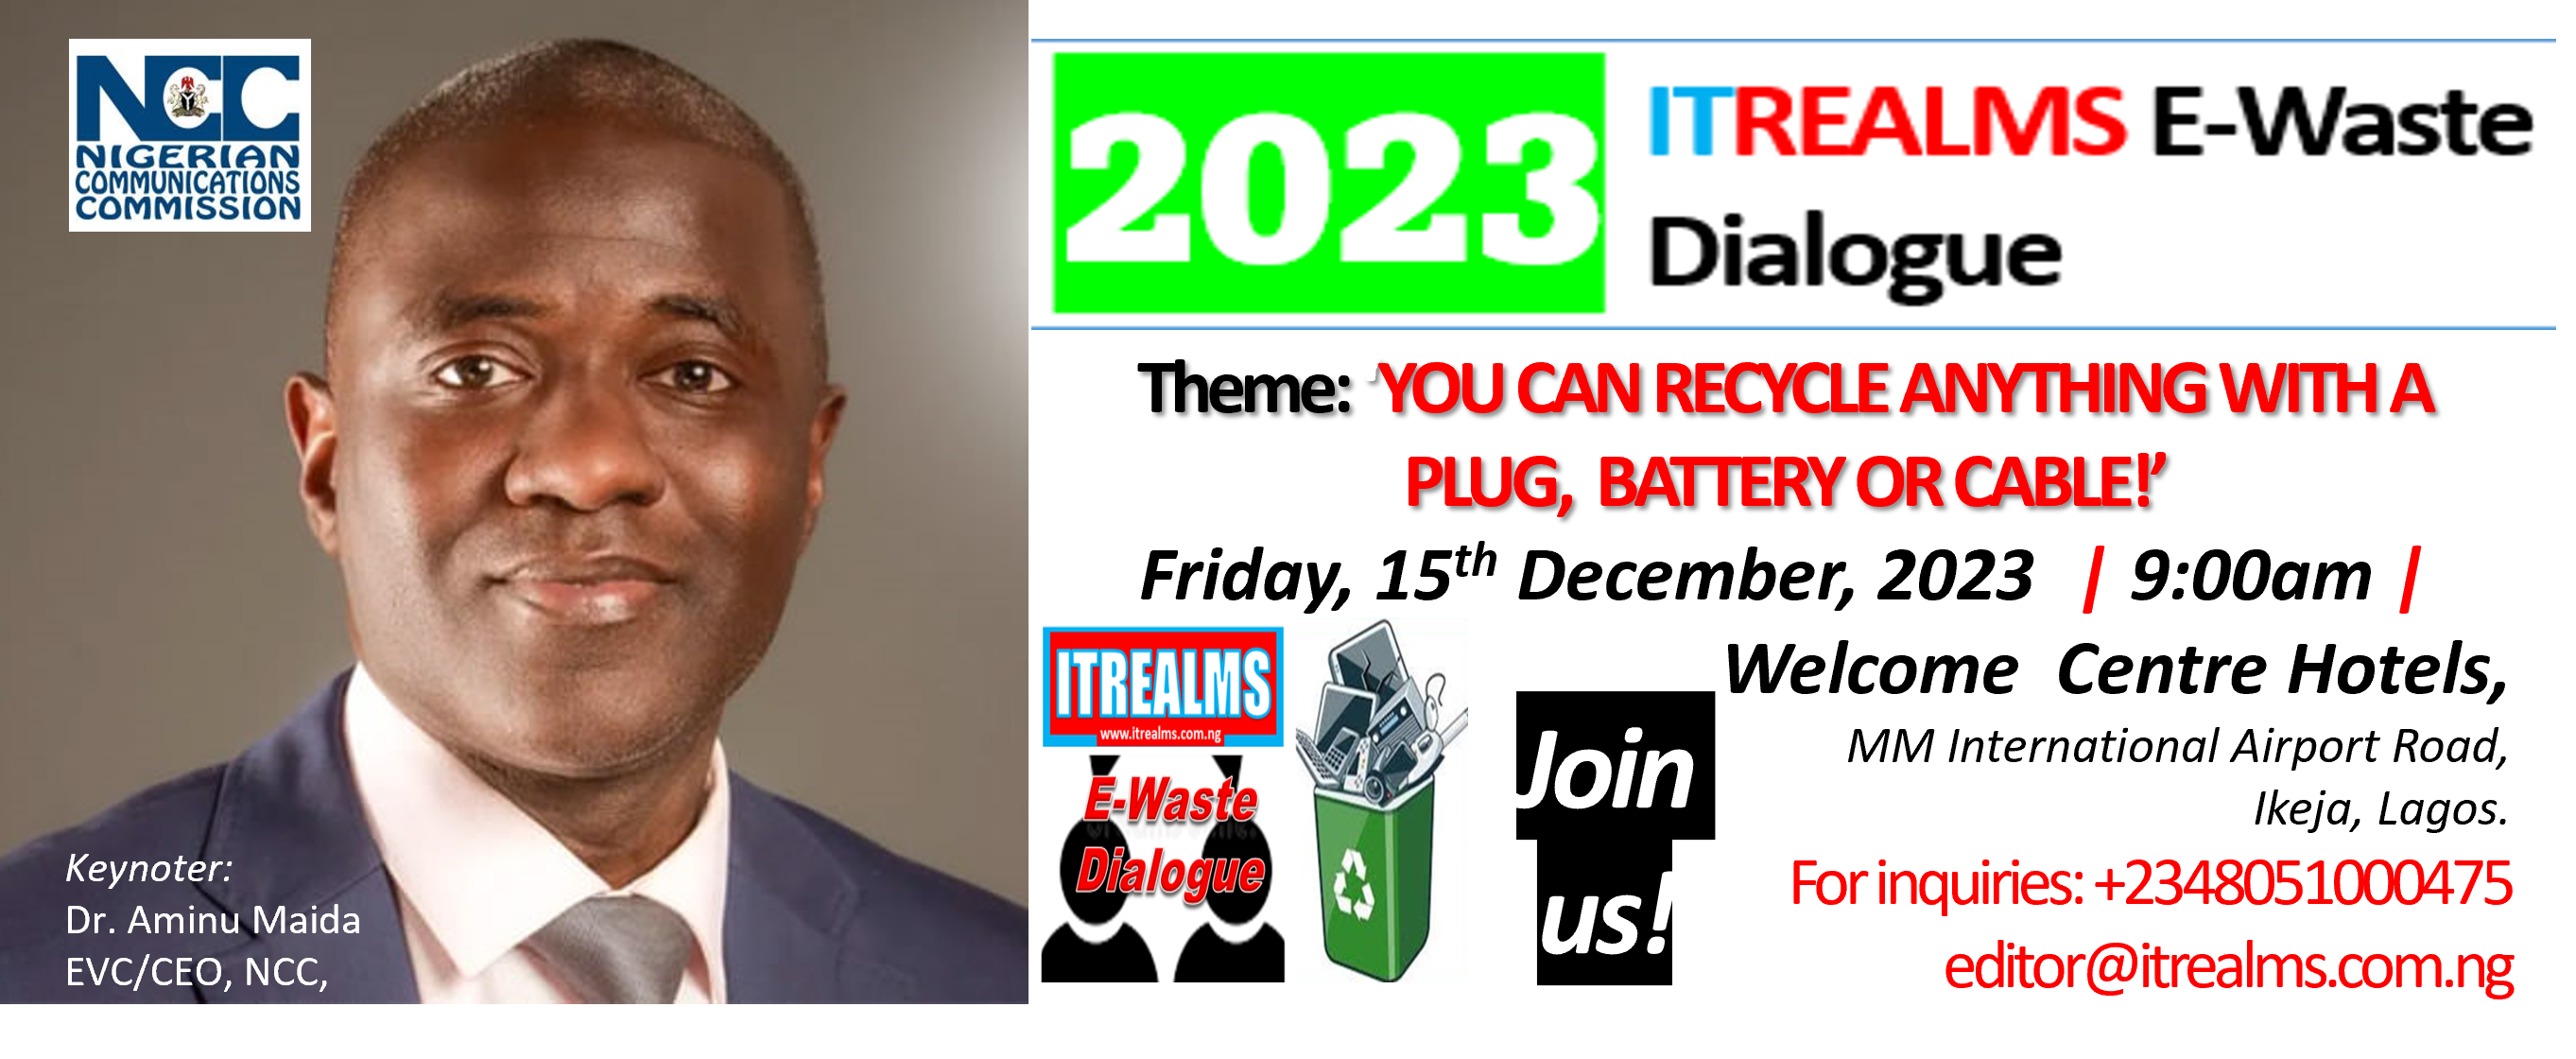 NCC Leads Stakeholders to 2023 ITREALMS E-Waste Dialogue